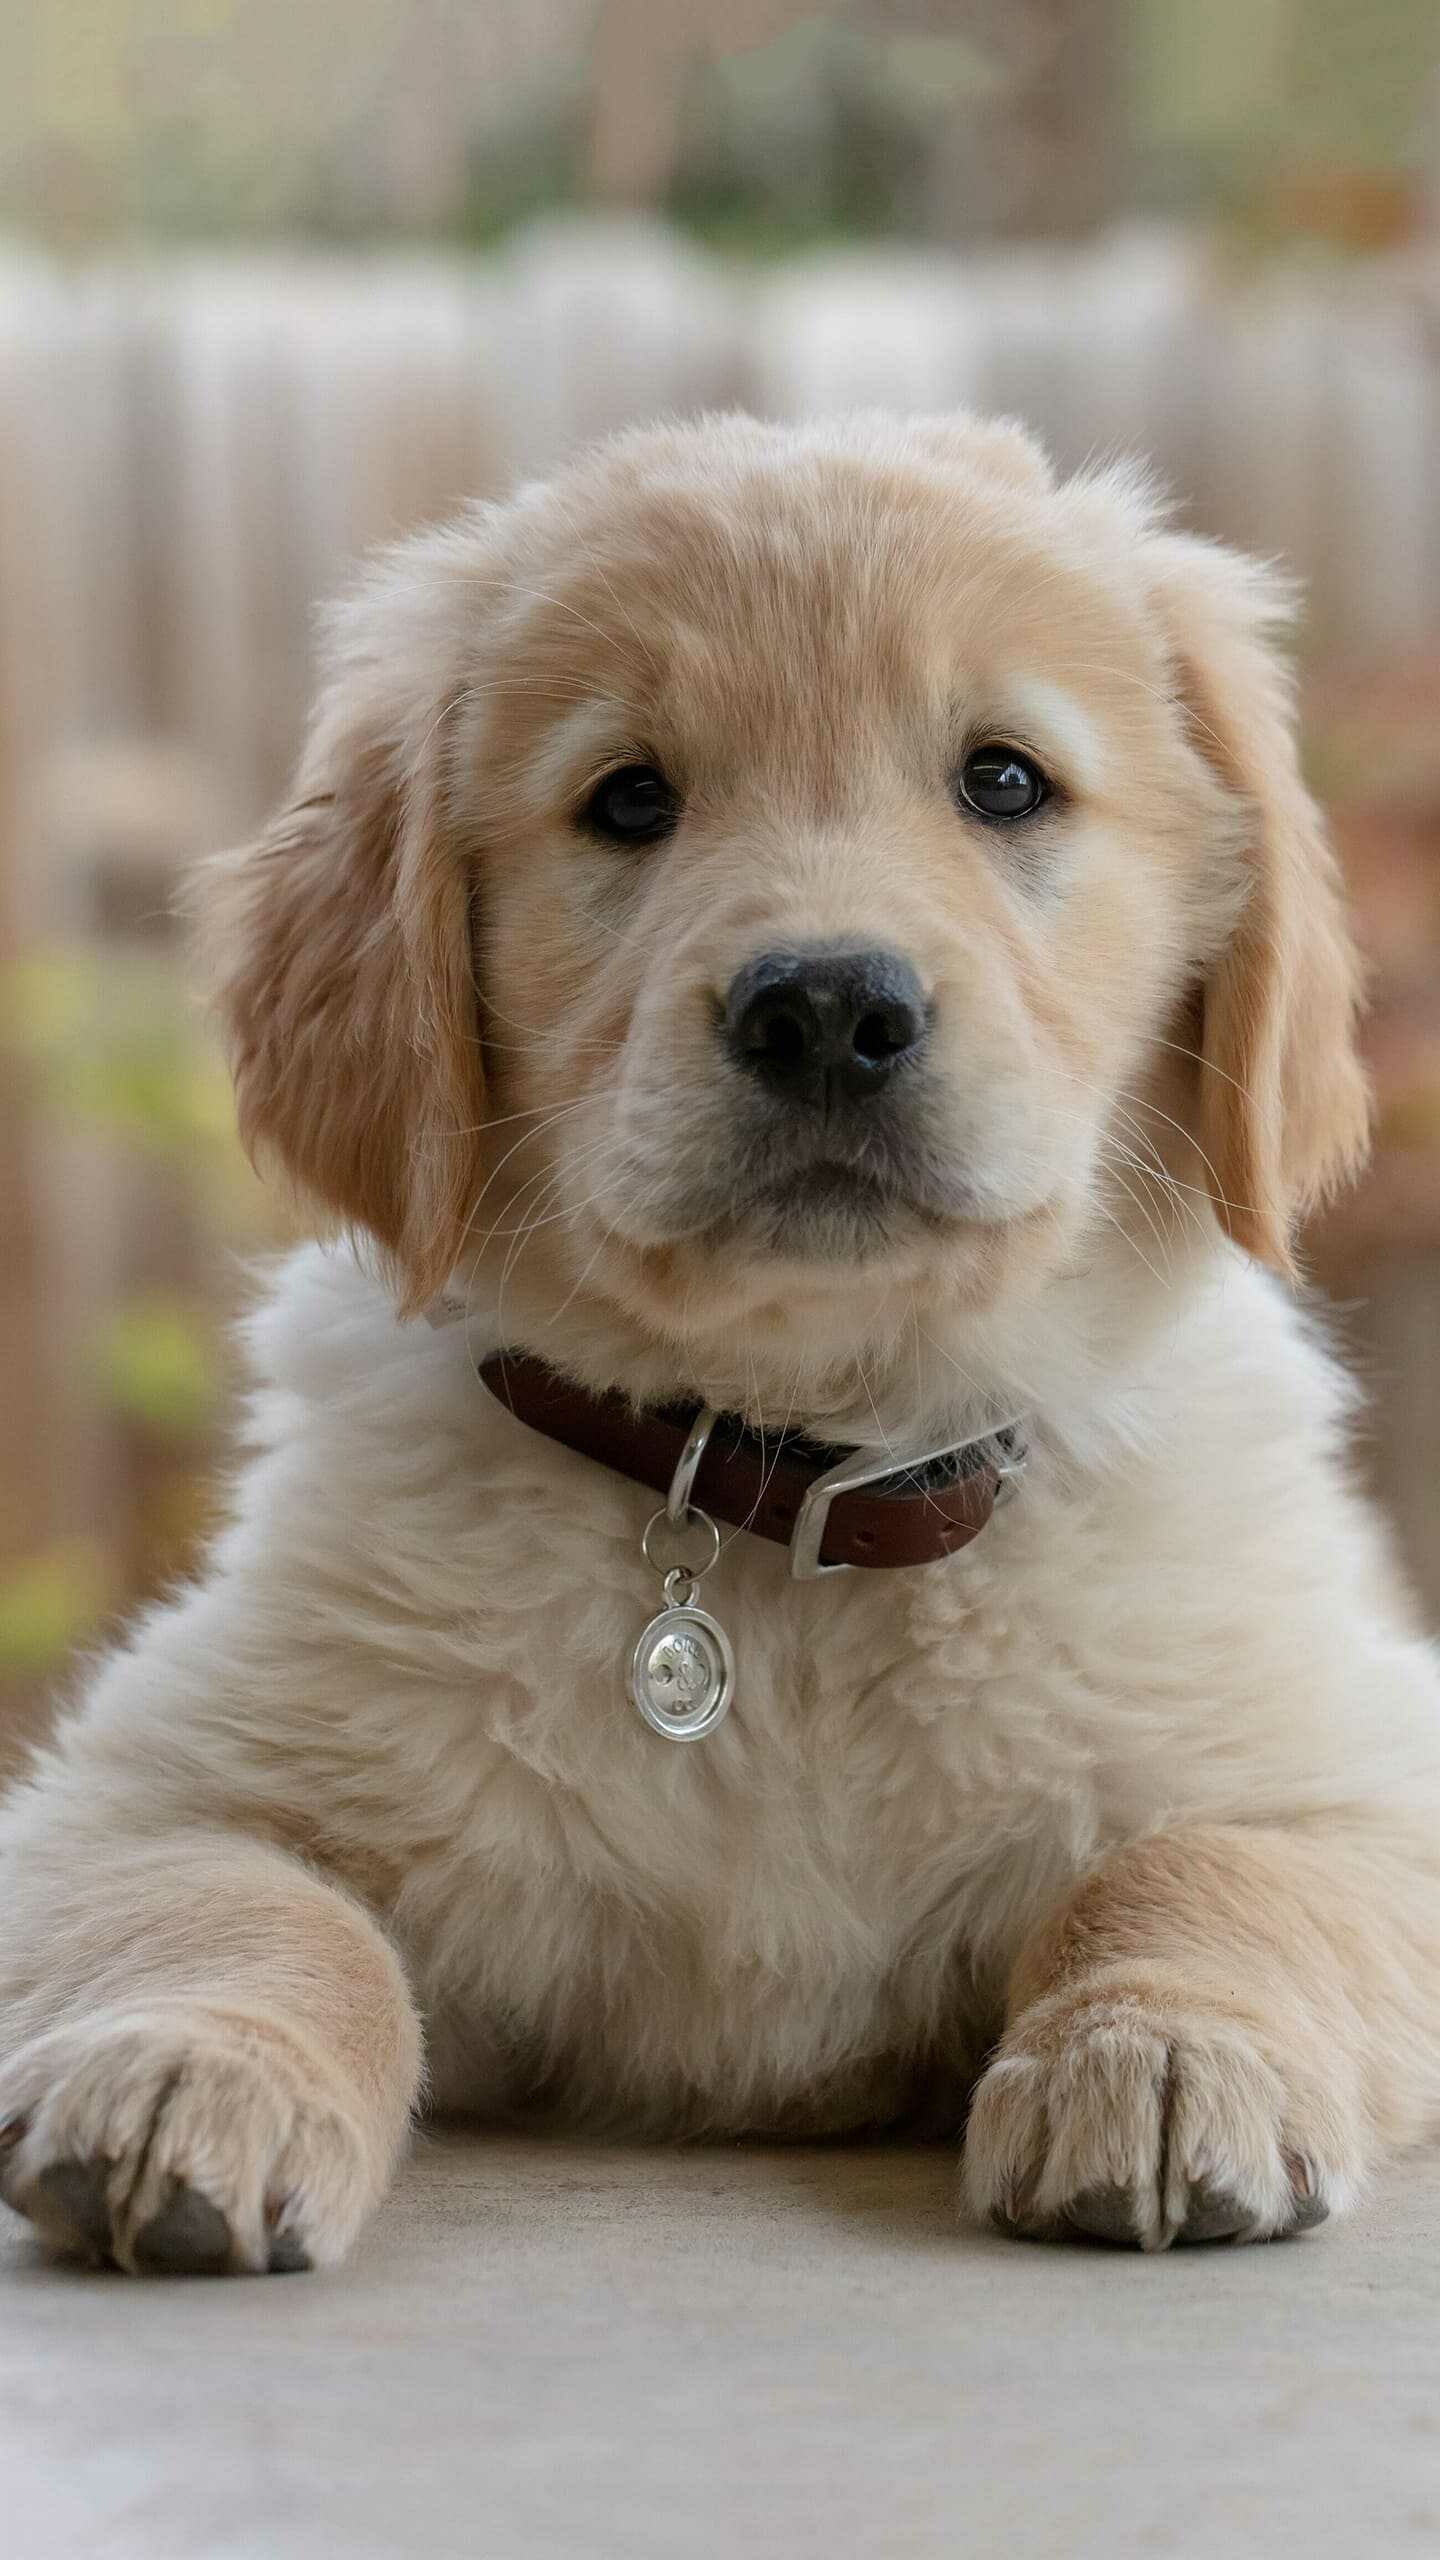 Golden Retriever: Considered an intelligent, gentle-natured, and very affectionate breed of dog, Puppy. 1440x2560 HD Wallpaper.